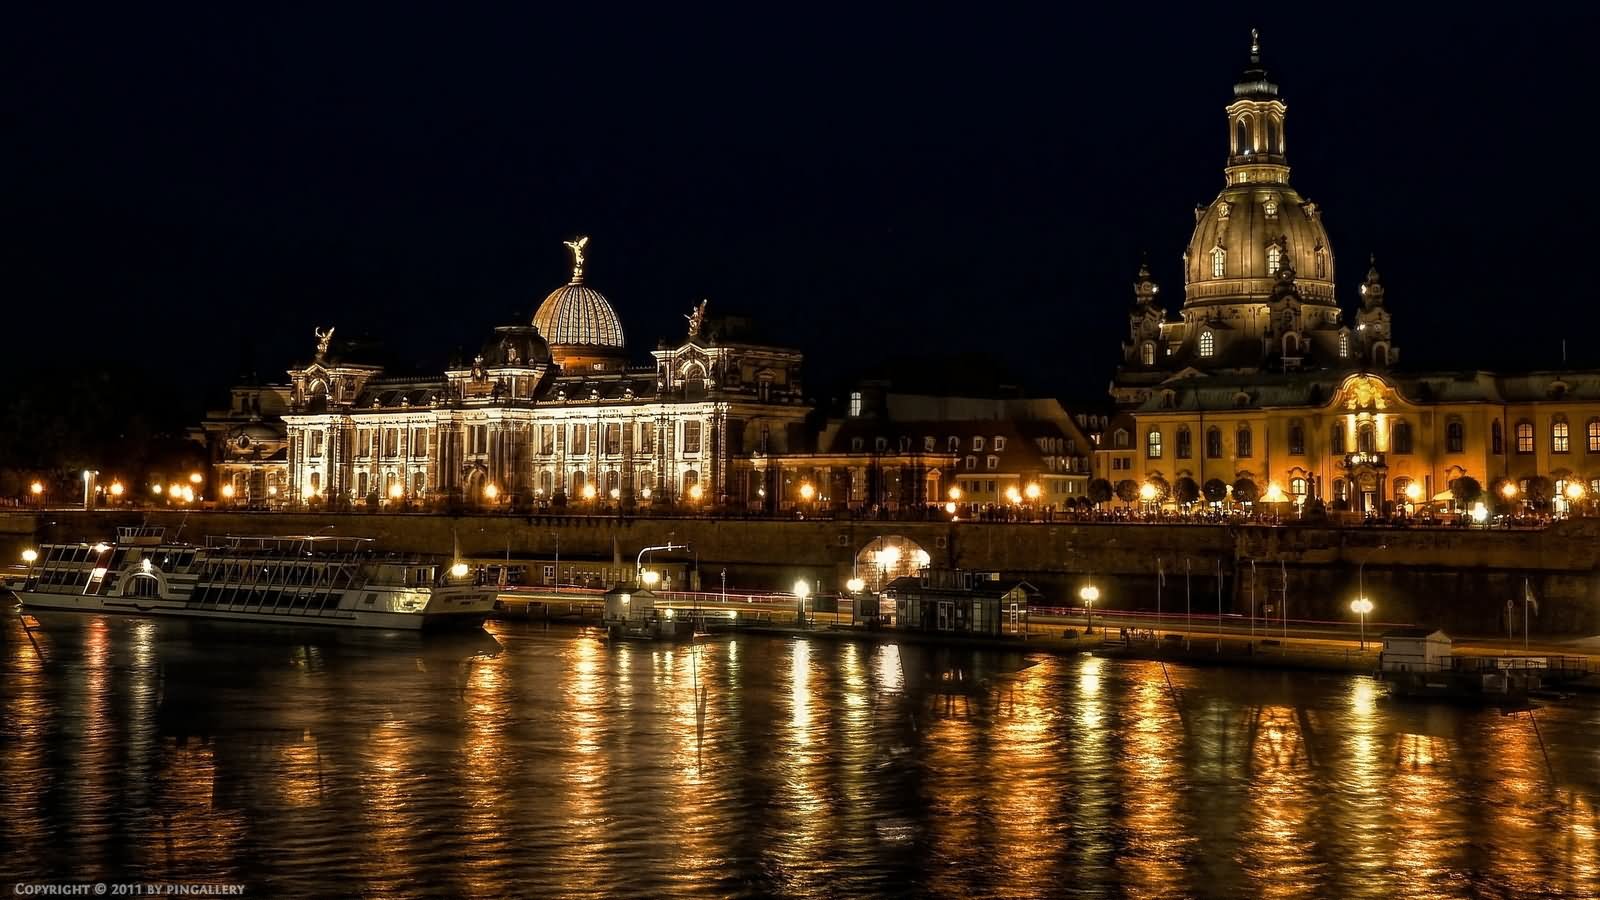 Back View Of The Frauenkirche Dresden Across The River At Night